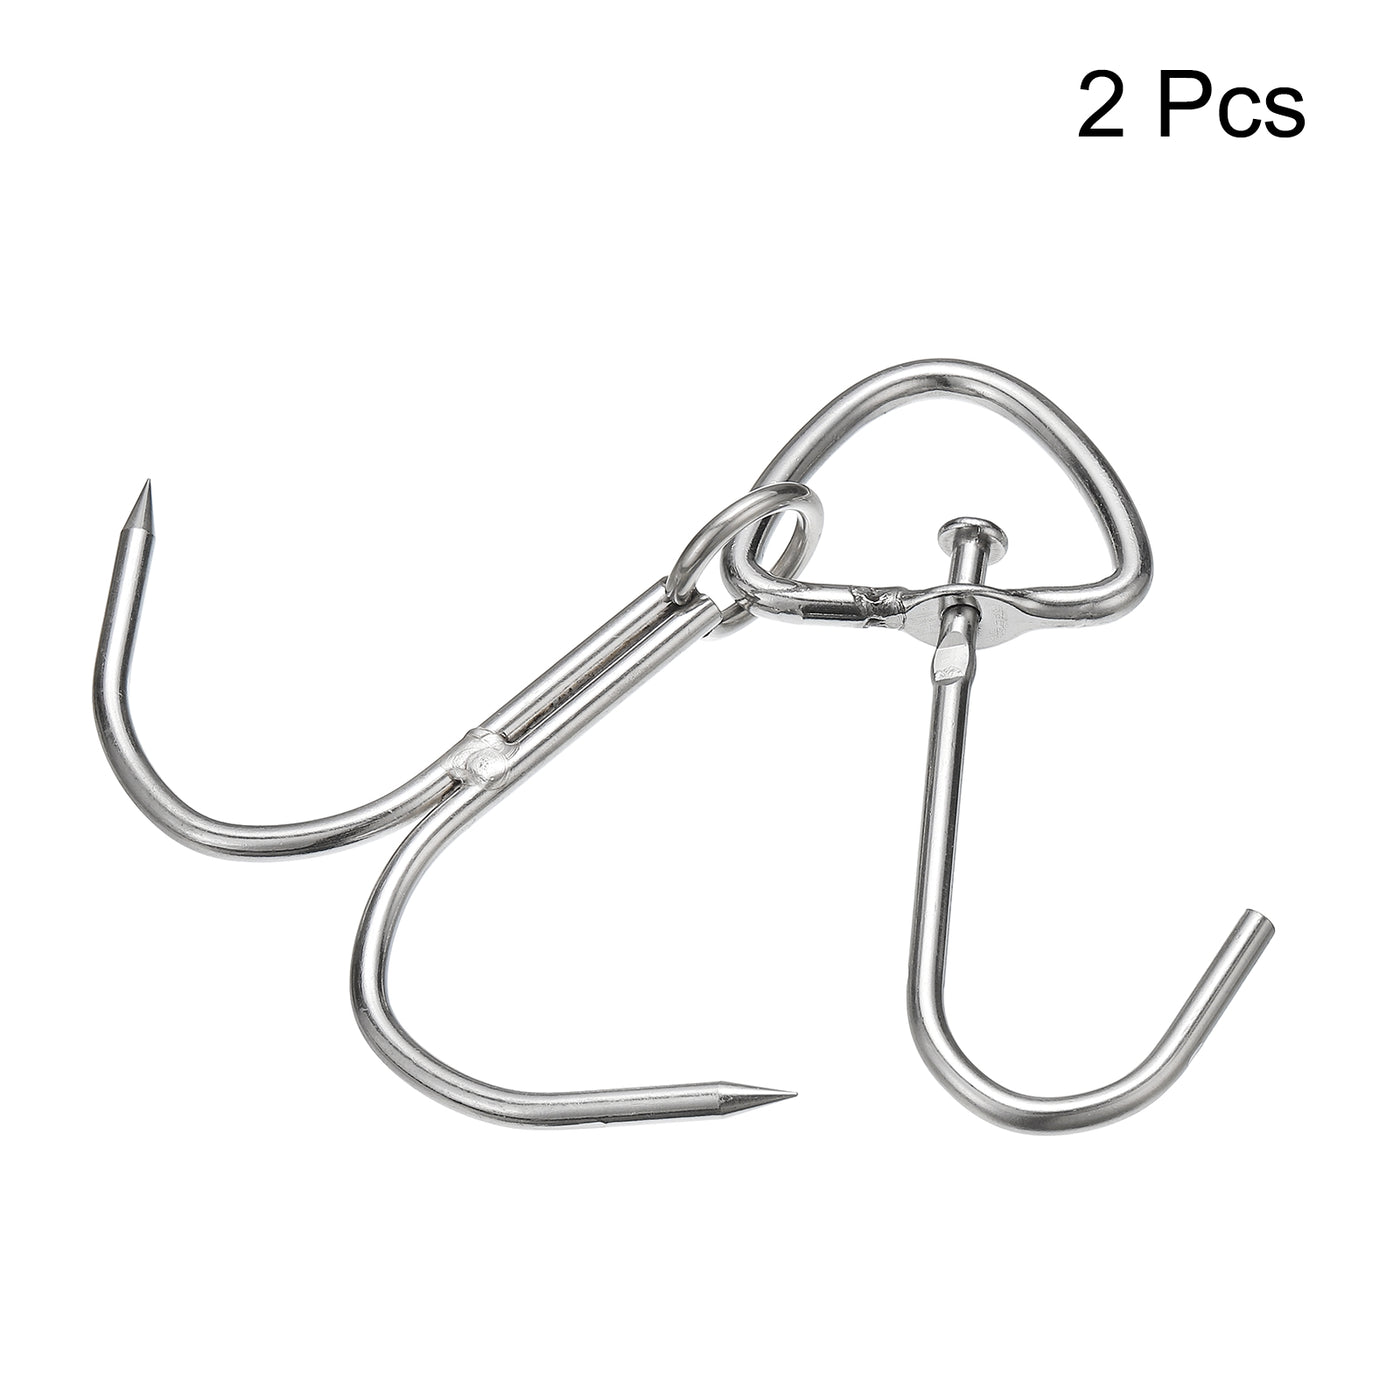 uxcell Uxcell Double Meat Hooks Stainless Steel Smoker Hook Tools for Grill Cooking Fish Chicken